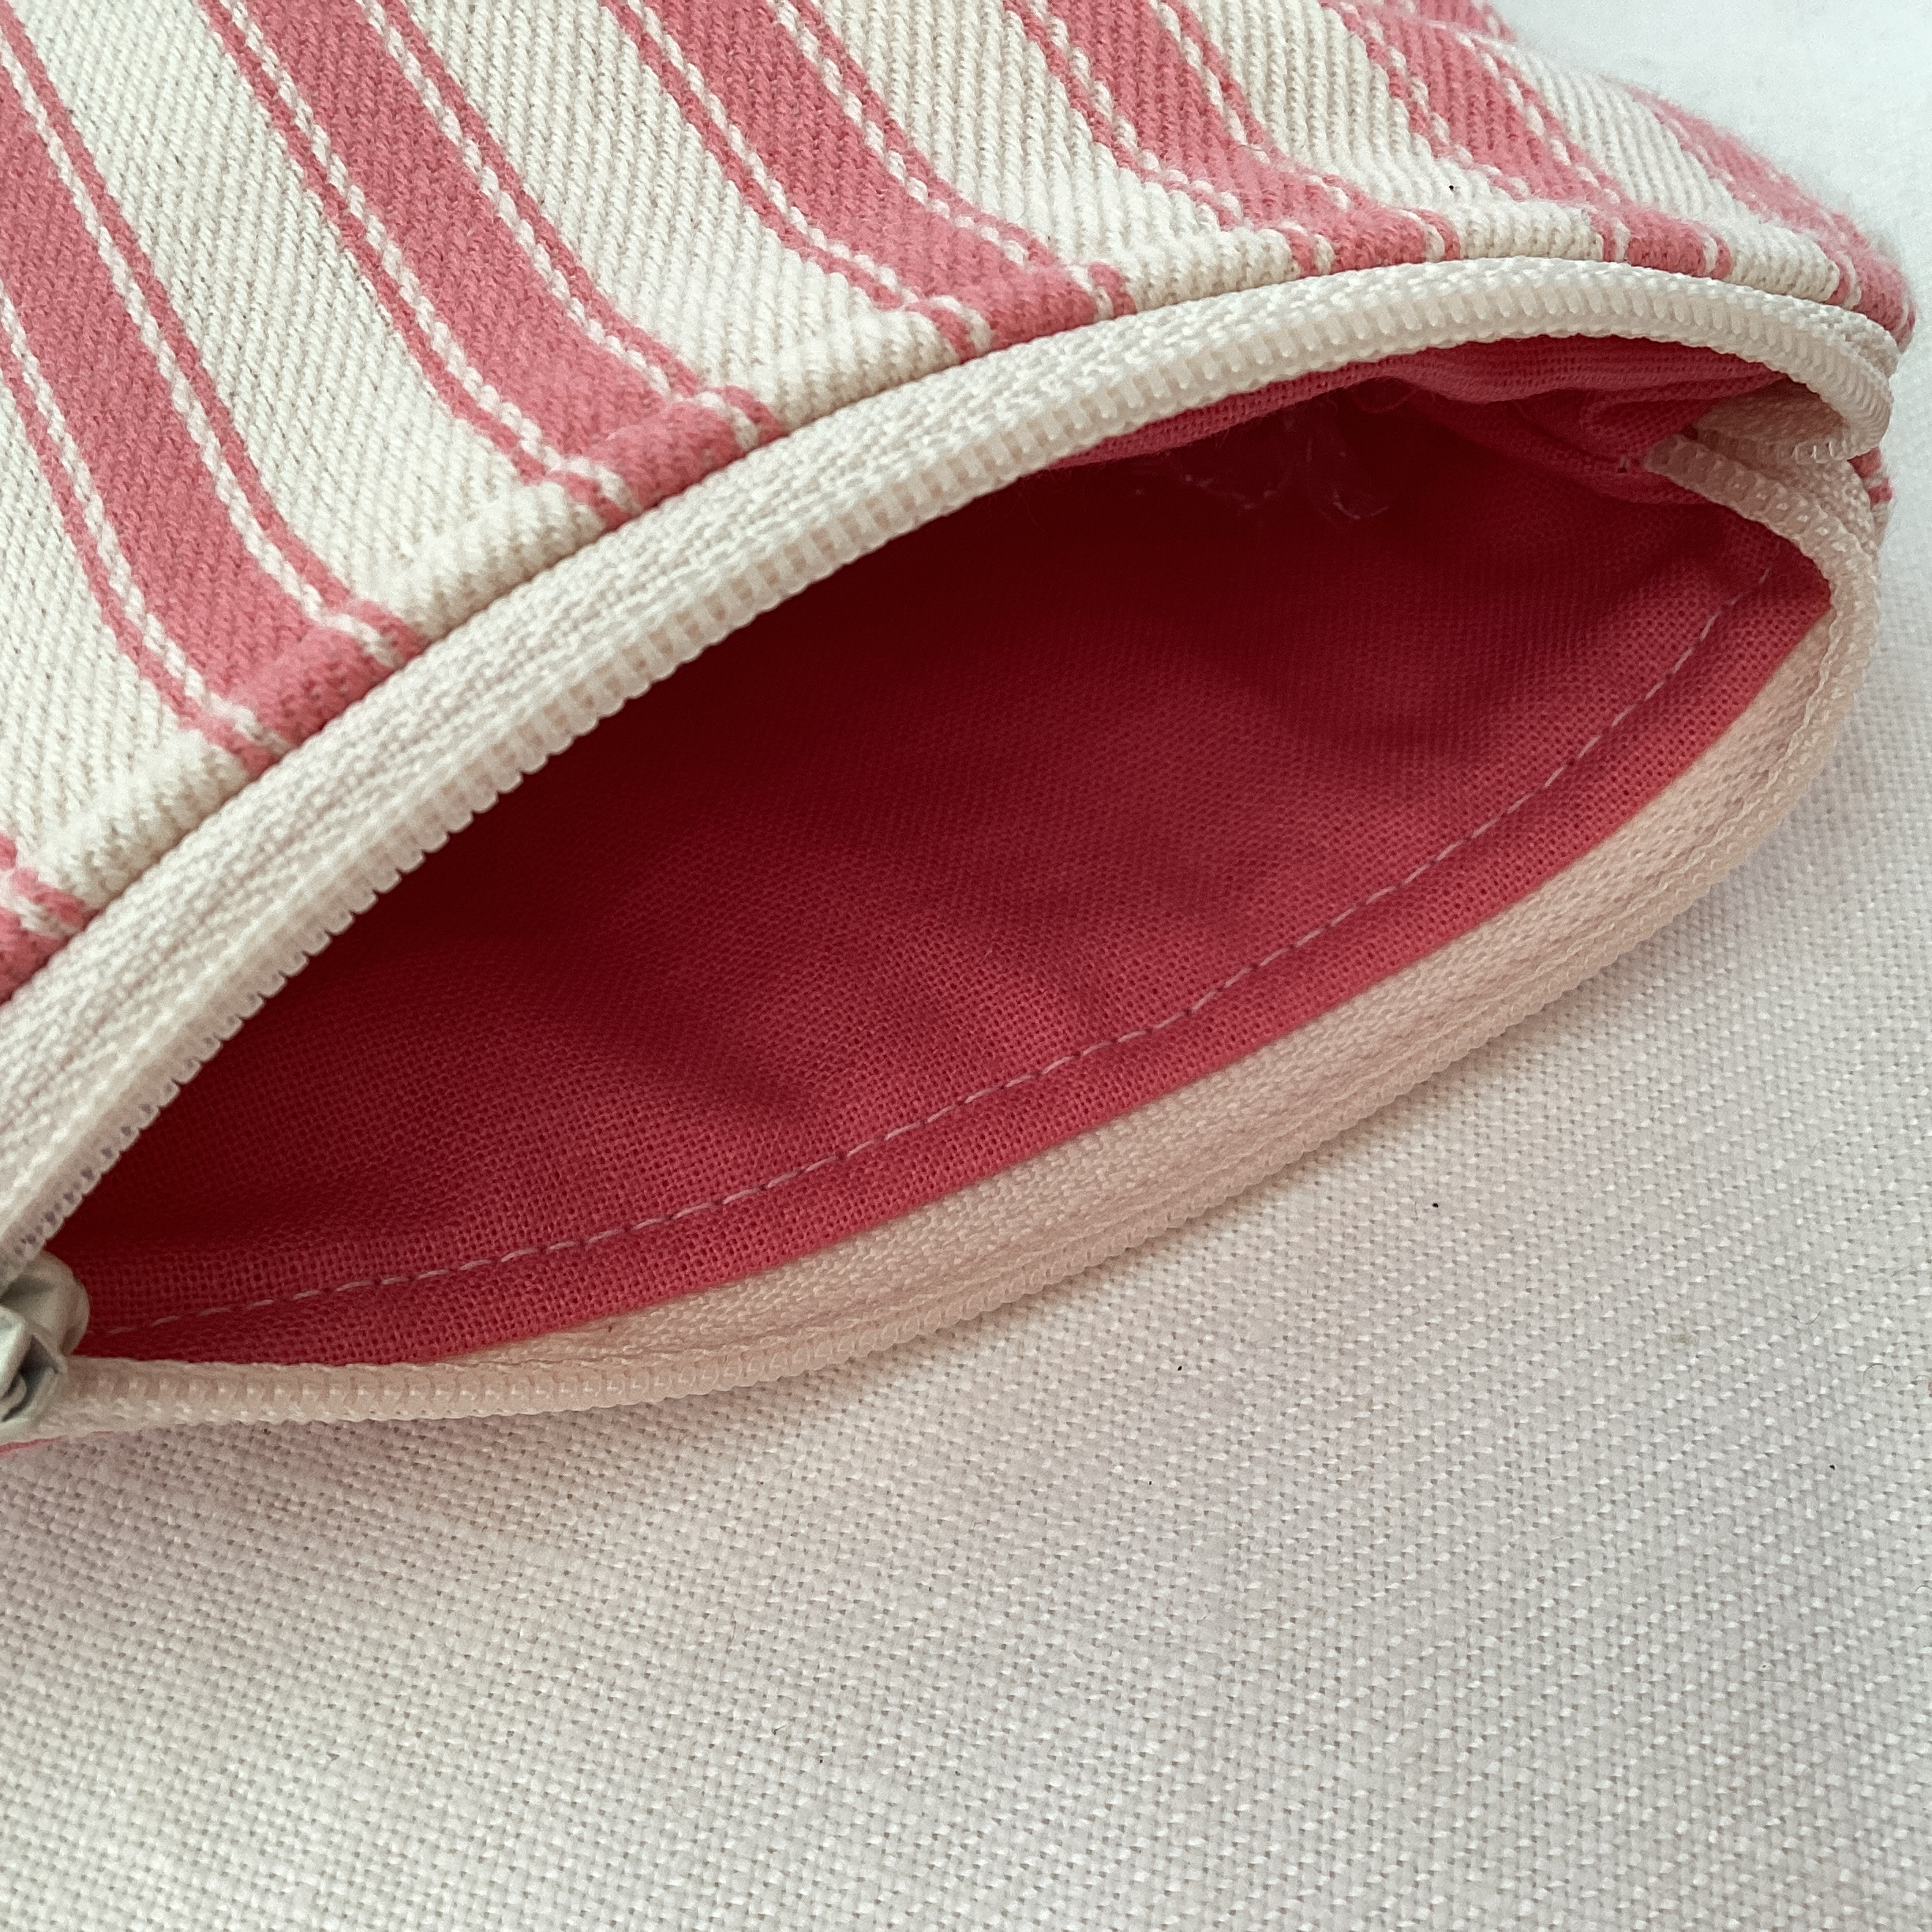 Zipped Coin Purse - pink and cream stripe